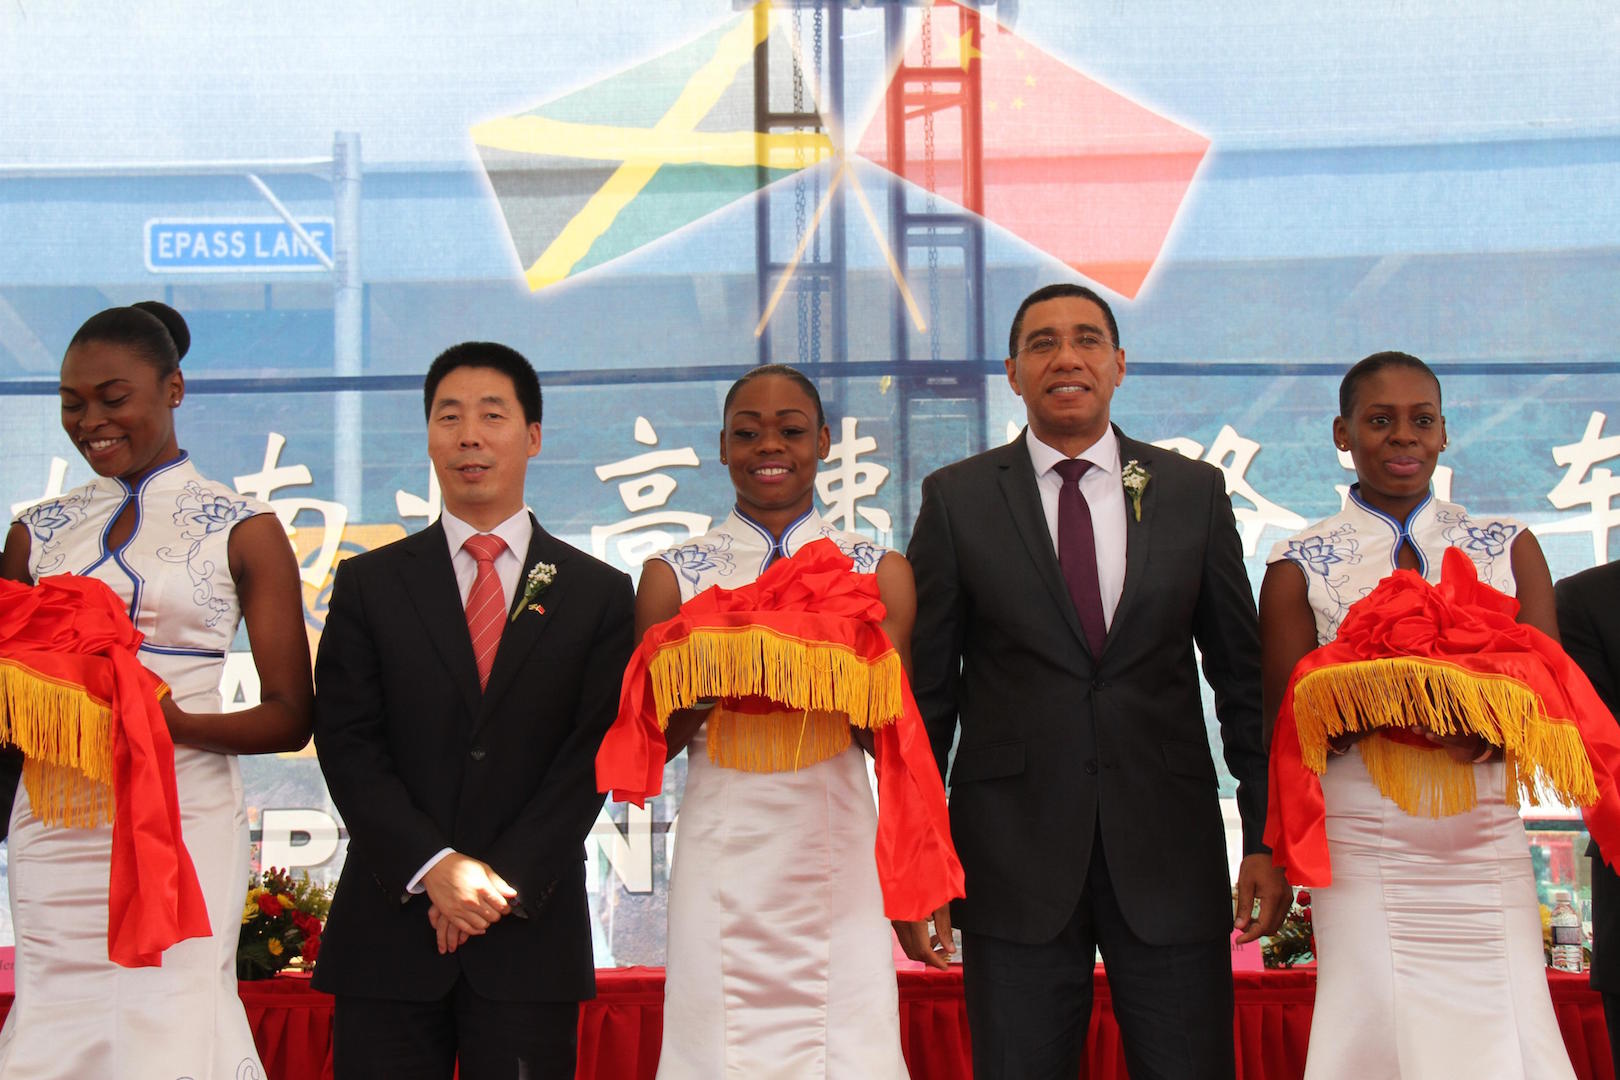 <p>Jamaican Prime Minister Andrew Holness (2nd R) and Chinese Ambassador to Jamaica Niu Qingbao (2nd L) attend the ribbon cutting ceremony for CCCC&#8217;s North-South Highway in Caymanas, Jamaica, 2016 (image: Alamy)</p>